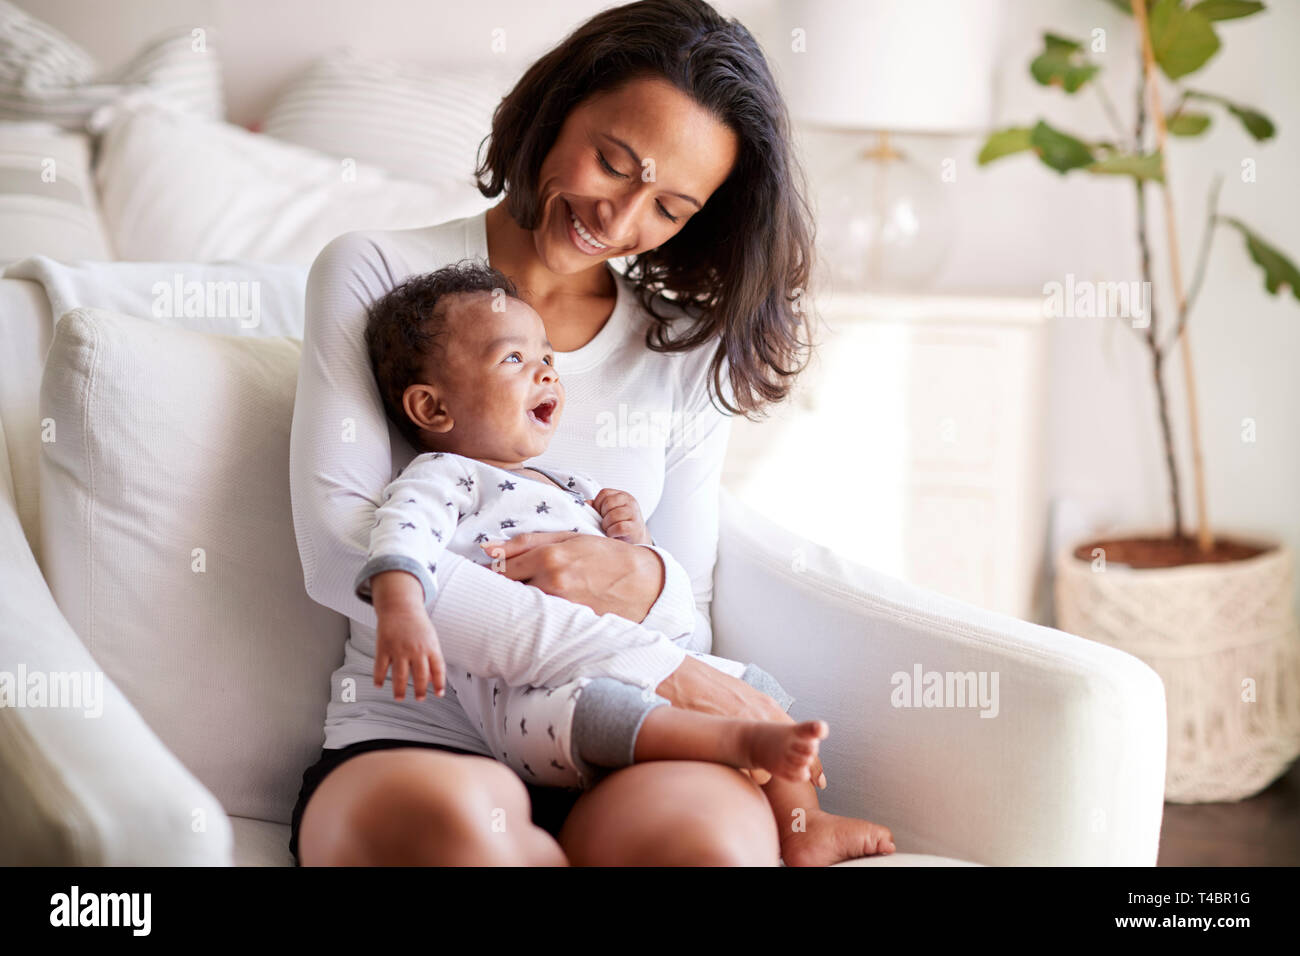 Young adult mother sitting in an armchair in her bedroom, holding her three month old baby son in her arms and looking down at him smiling, close up Stock Photo